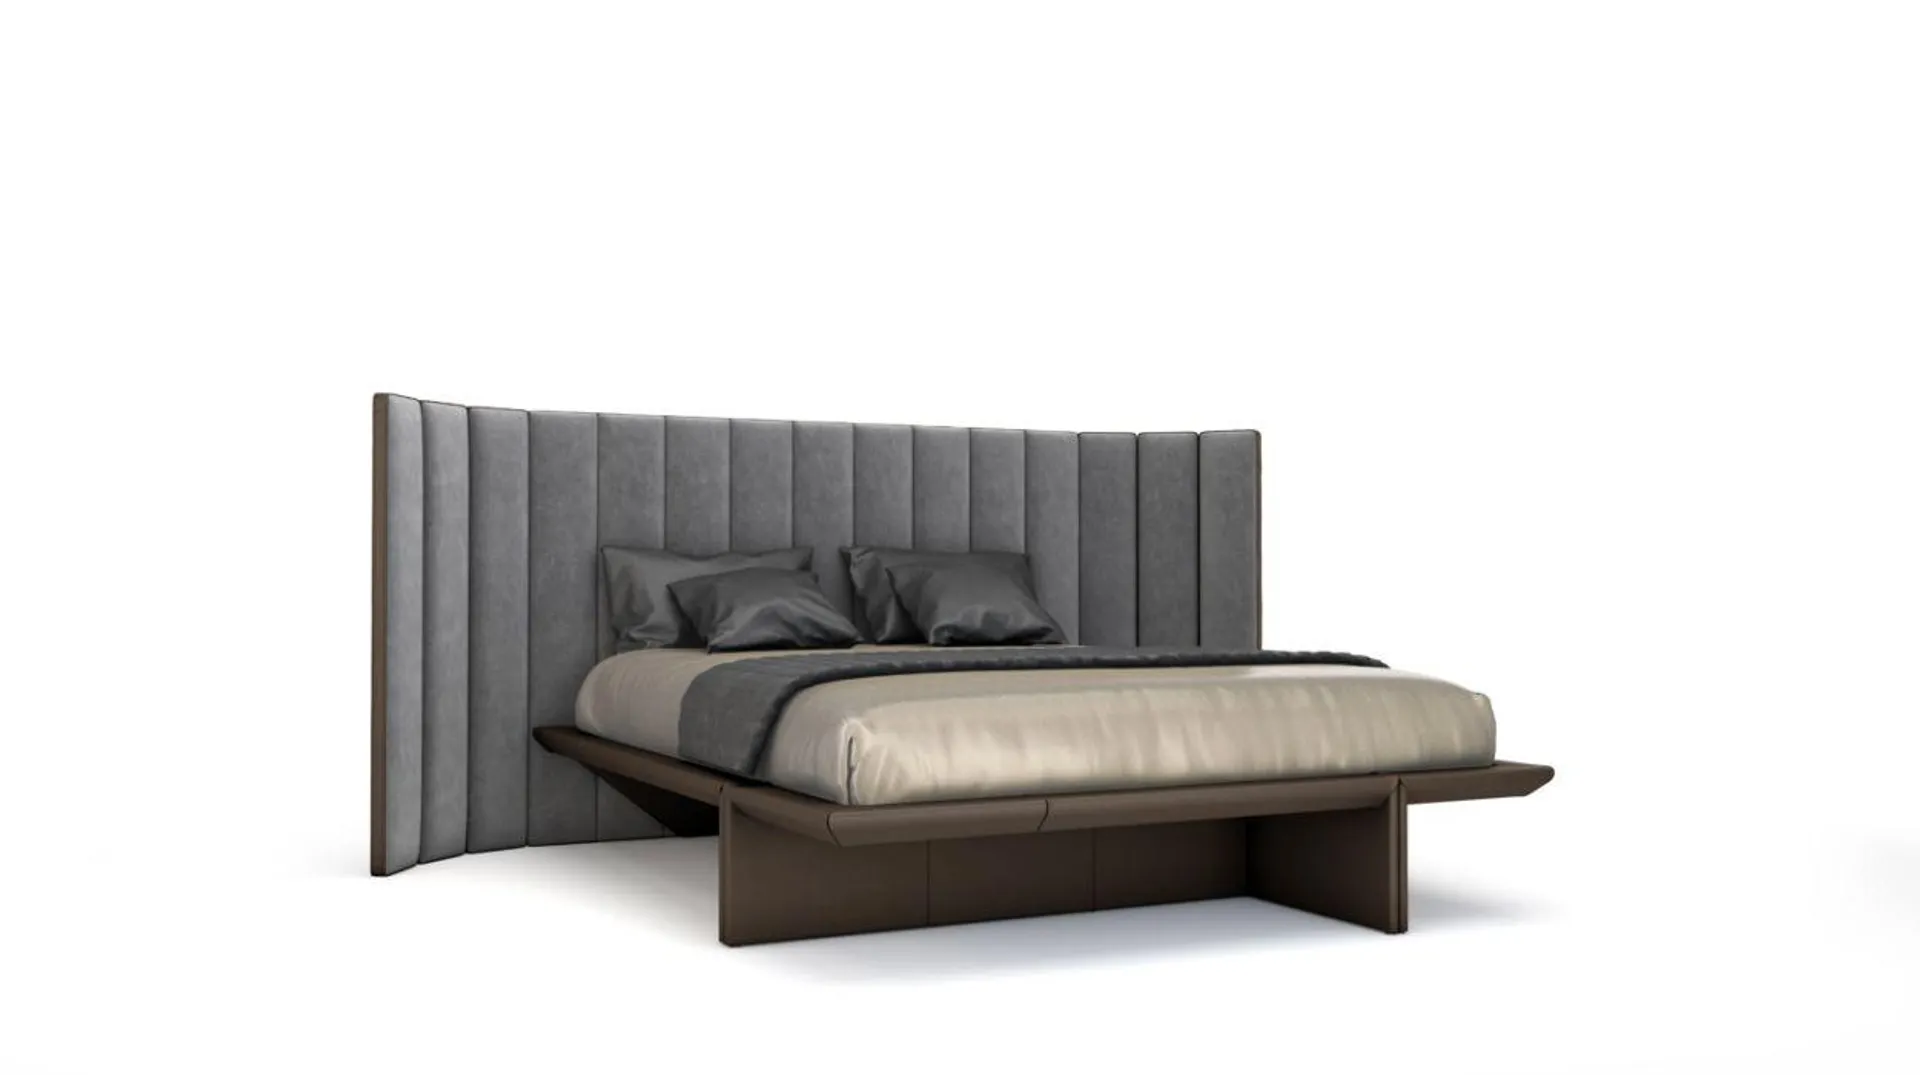 BACKSTAGE bed with side panels - h.125 cm